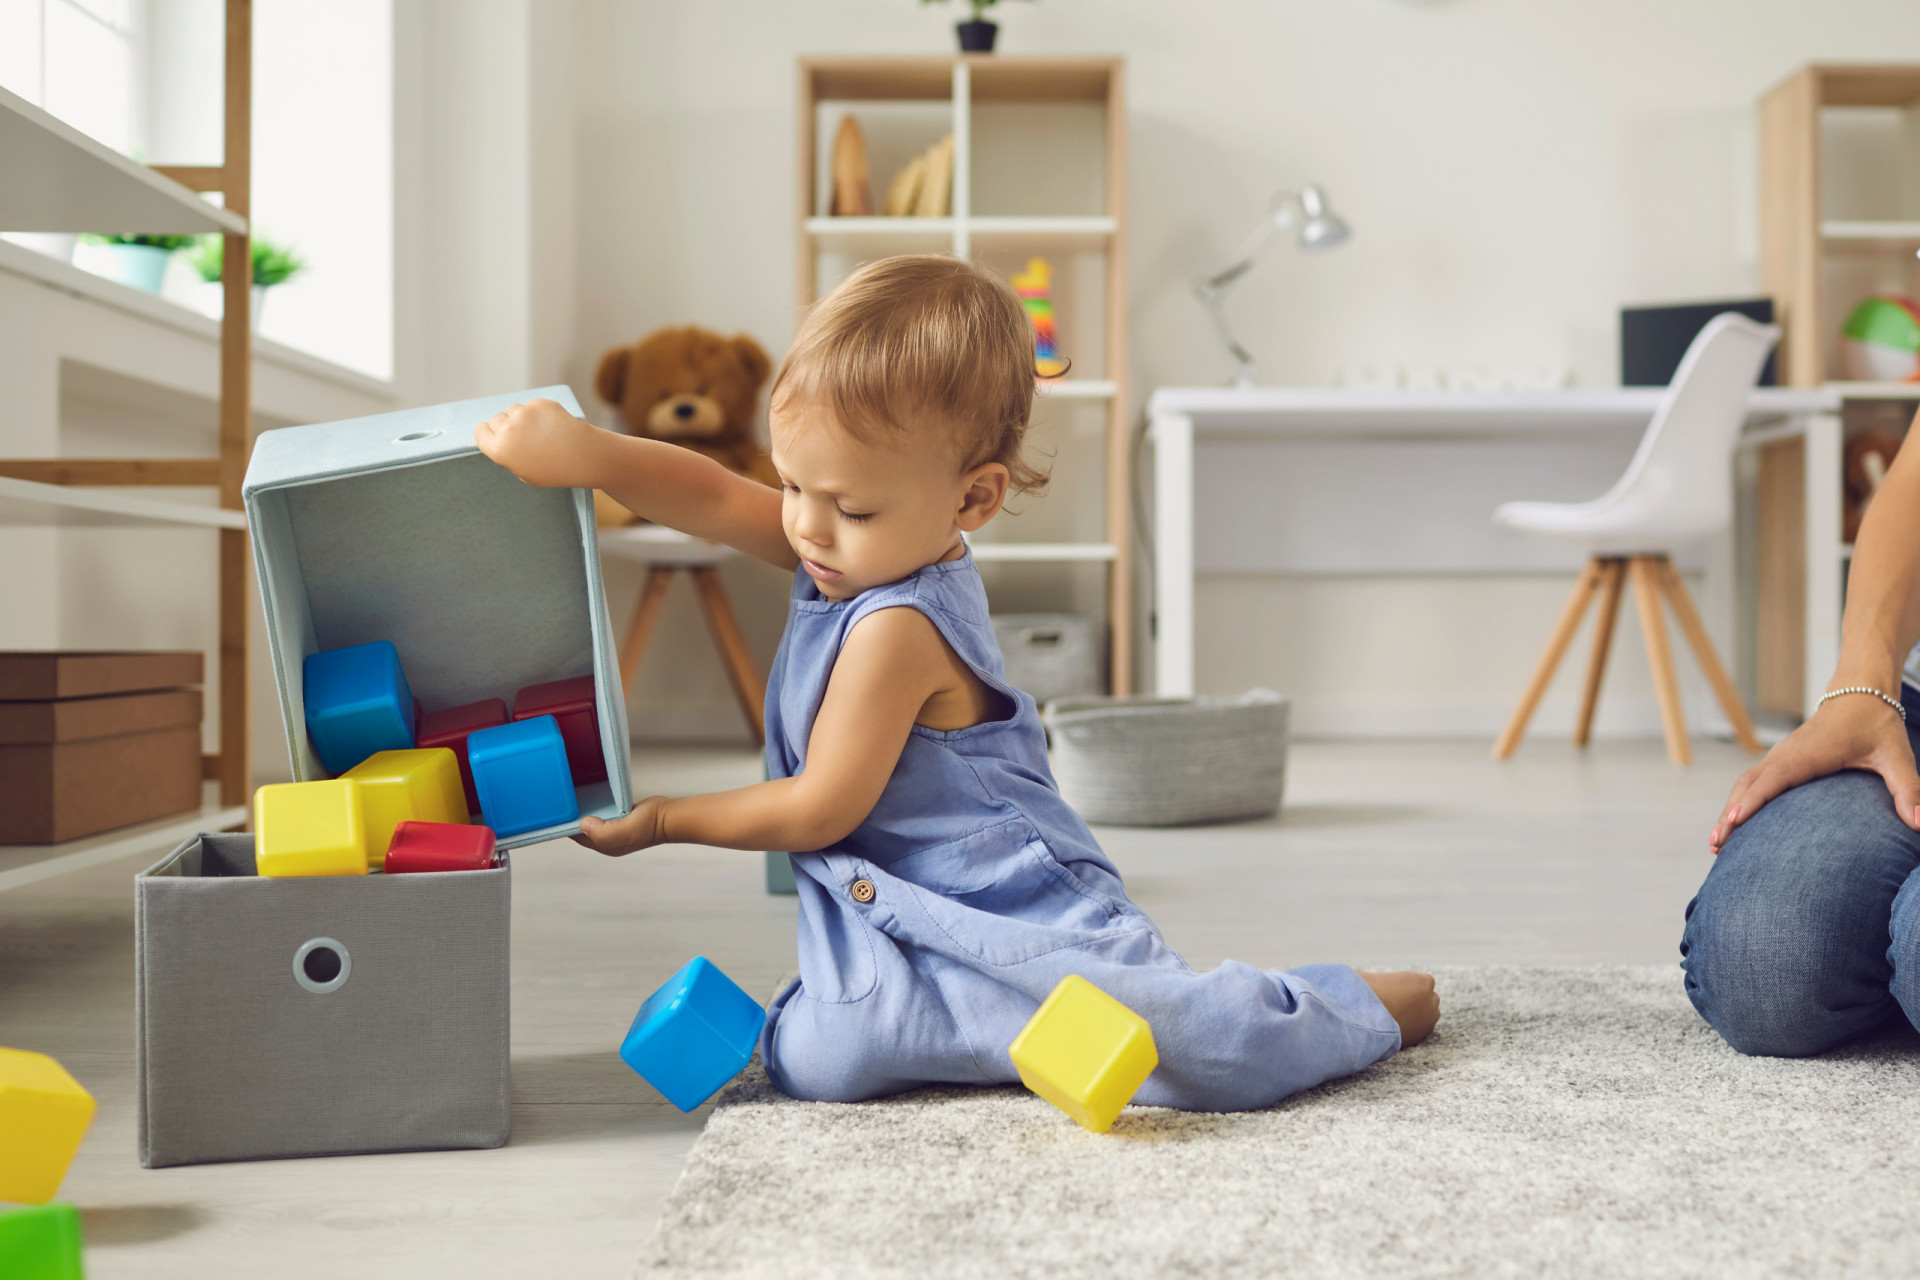 <p>Picking up after playtime is a vital lesson in responsibility. It shows kids that taking care of their messes and shared spaces is an important part of being responsible.</p><p><a href="https://www.msn.com/en-us/community/channel/vid-7xx8mnucu55yw63we9va2gwr7uihbxwc68fxqp25x6tg4ftibpra?cvid=94631541bc0f4f89bfd59158d696ad7e">Follow us and access great exclusive content every day</a></p>